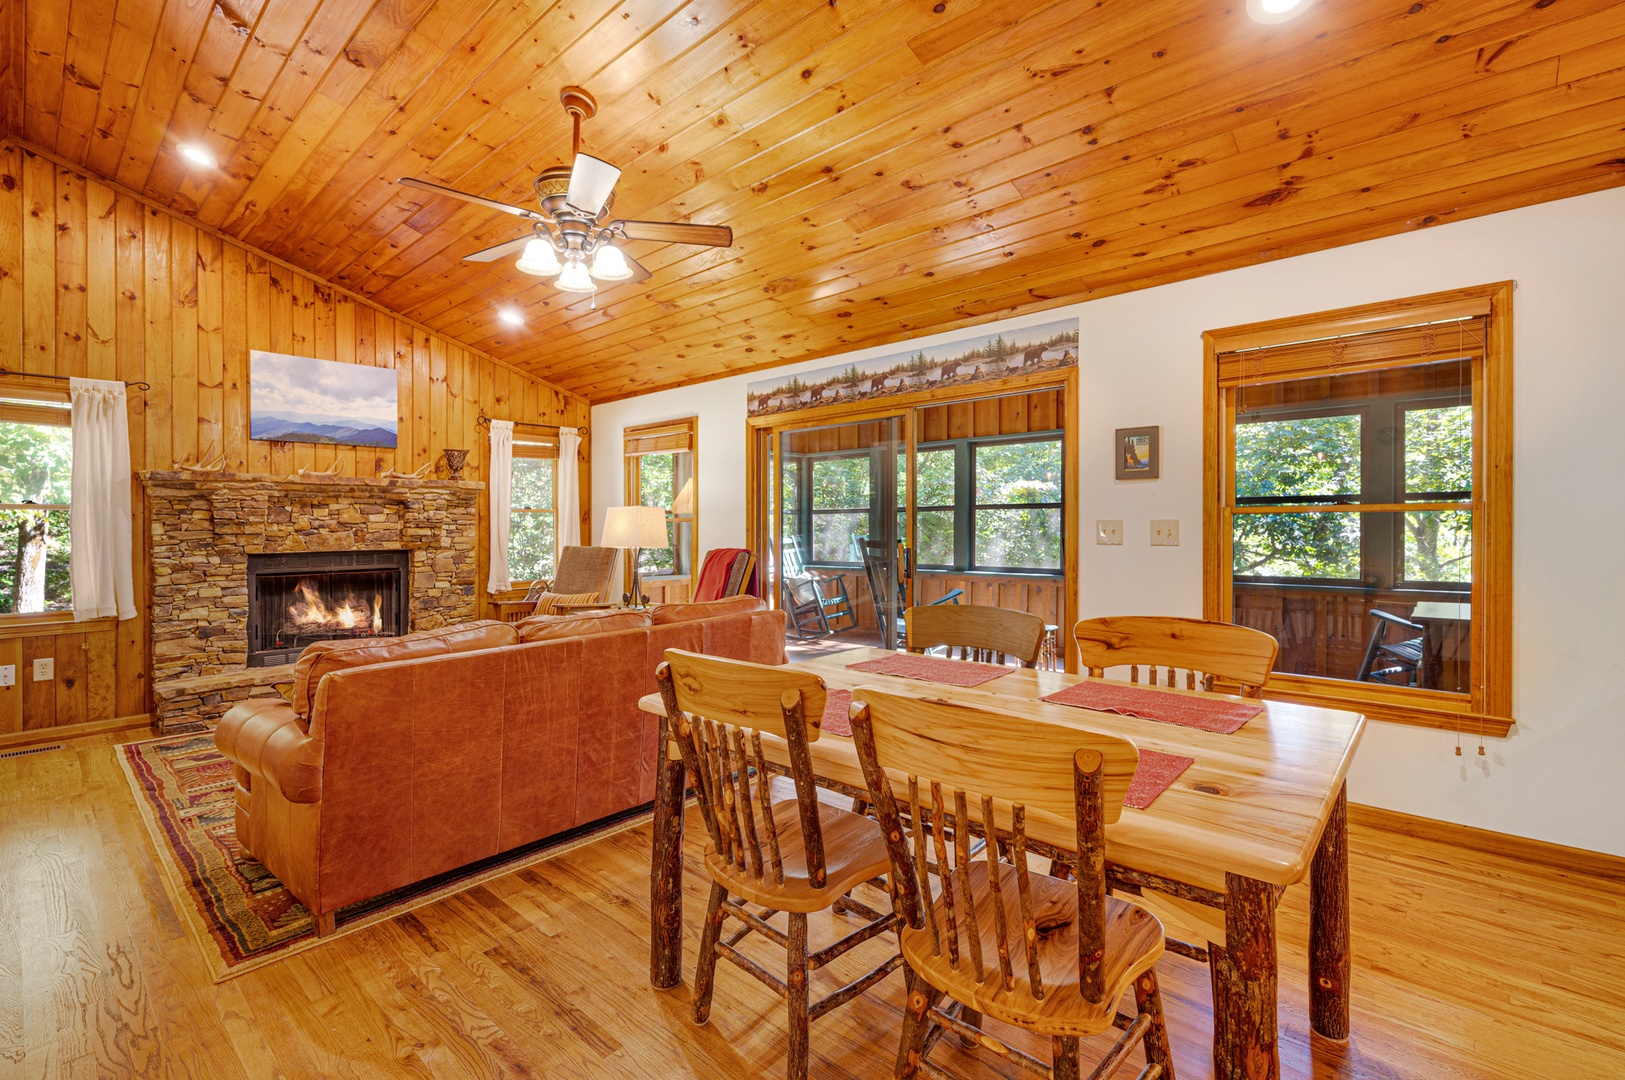 Creekside Getaway: Dining Area and Living Room